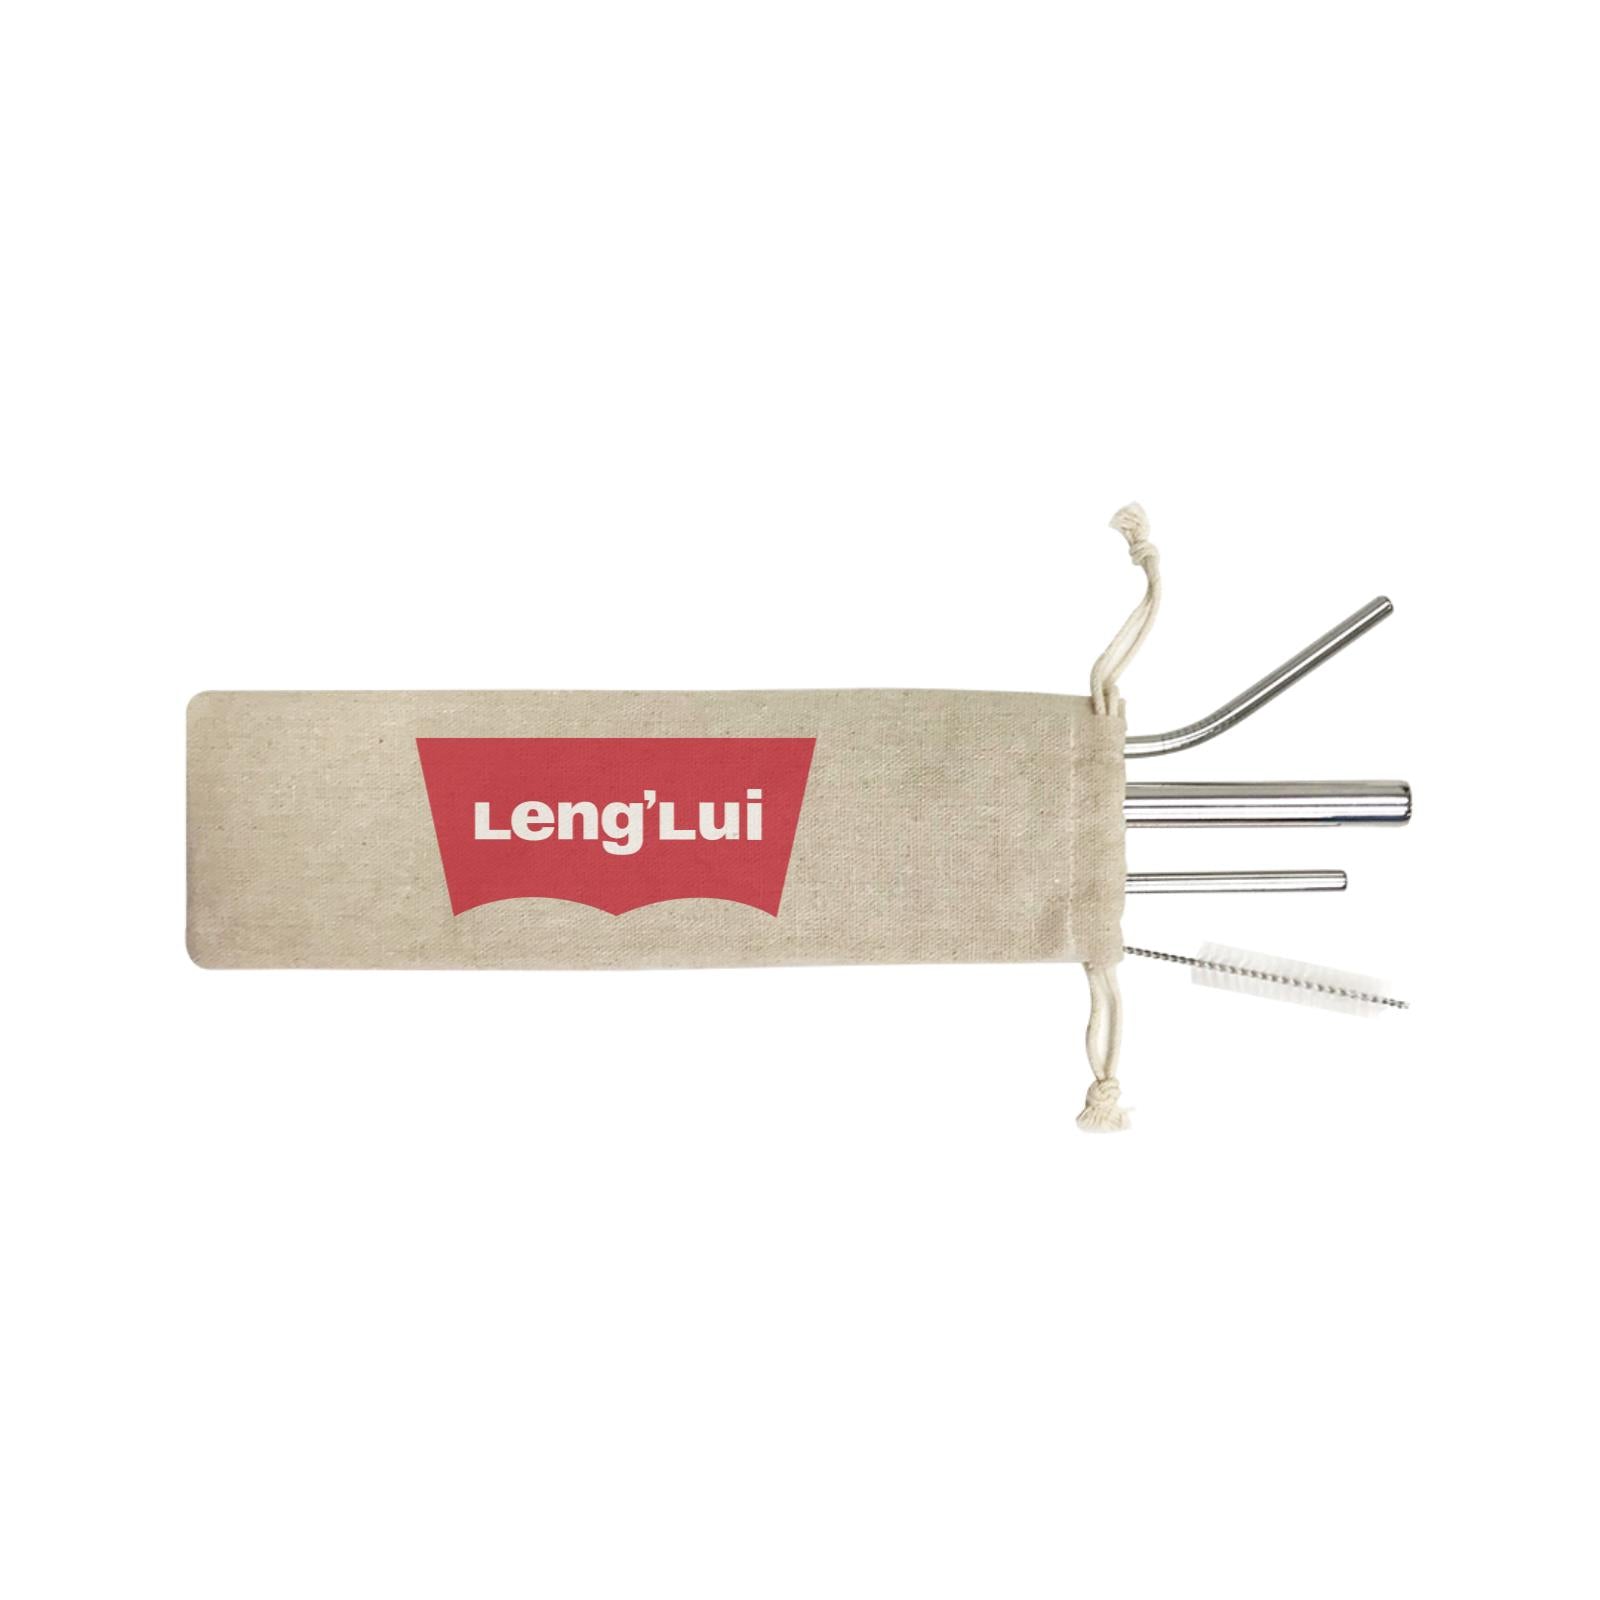 Slang Statement Lenglui 4-in-1 Stainless Steel Straw Set In a Satchel